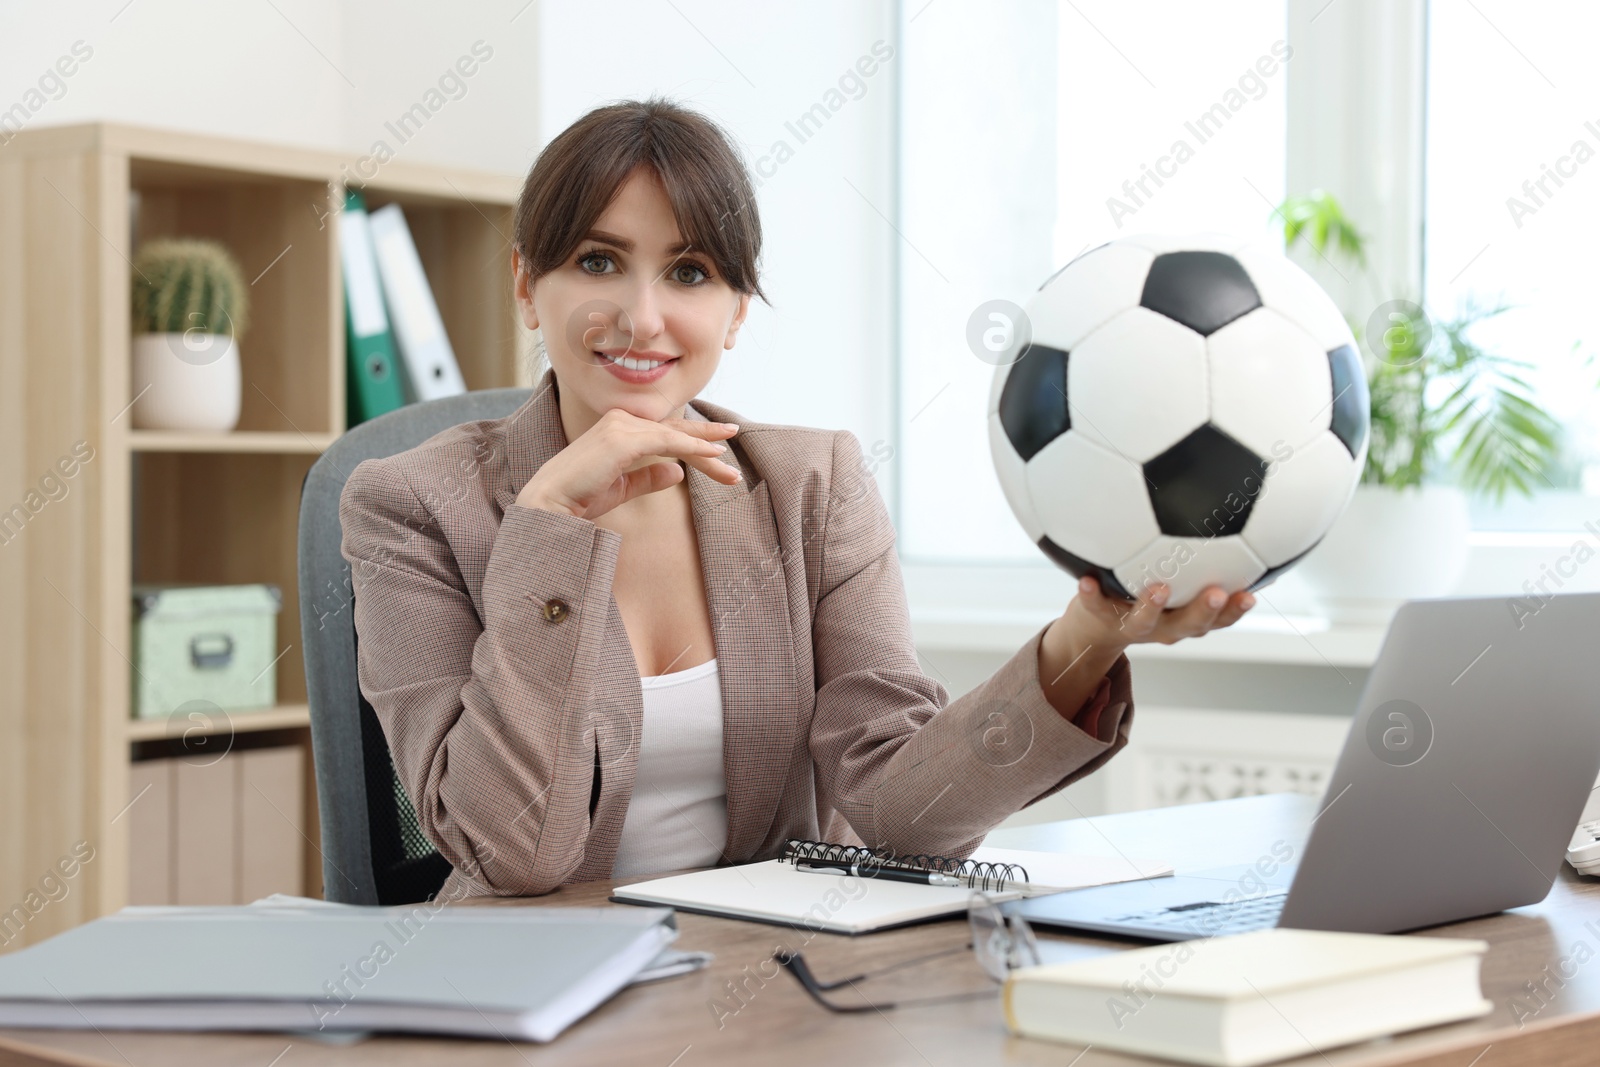 Photo of Smiling employee with soccer ball at table in office